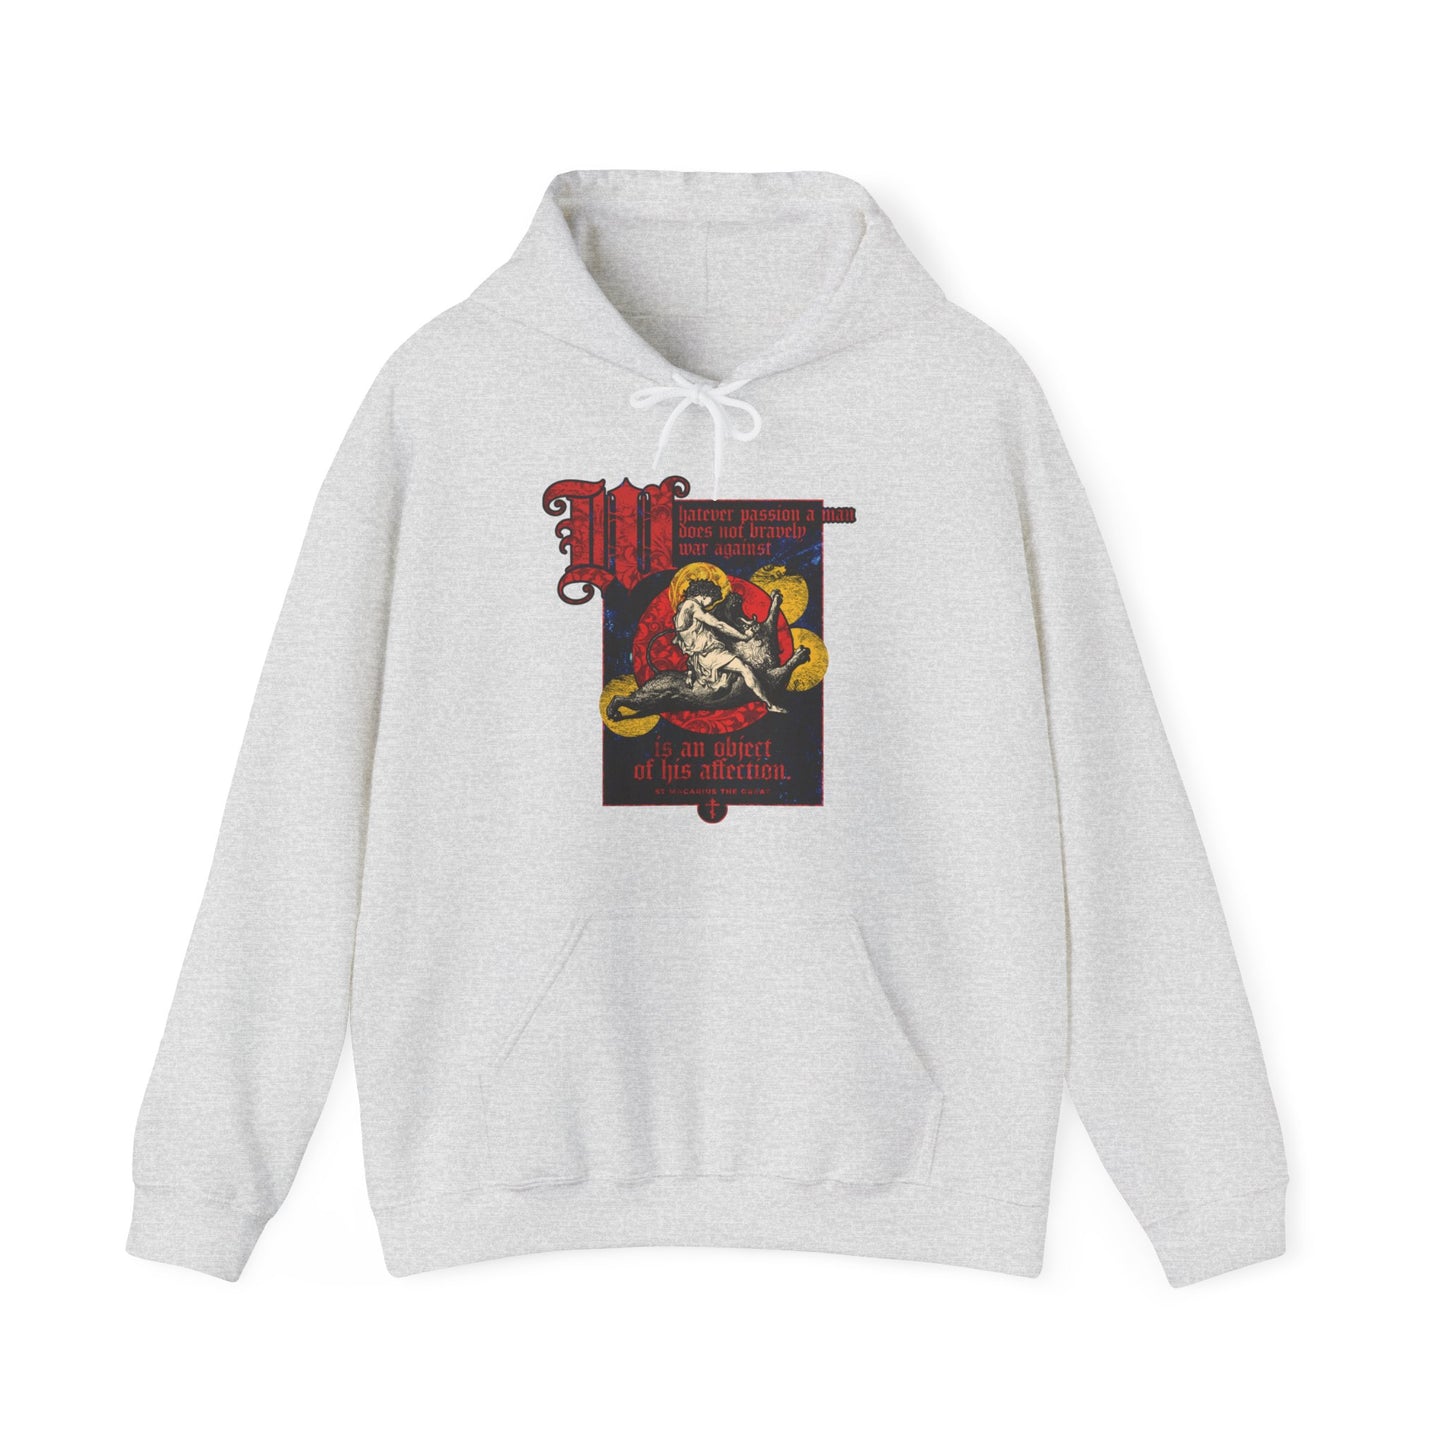 Whatever Passion a Man Does Not Bravely War Against (St Macarius the Great) No. 1 | Orthodox Christian Hoodie / Hooded Sweatshirt